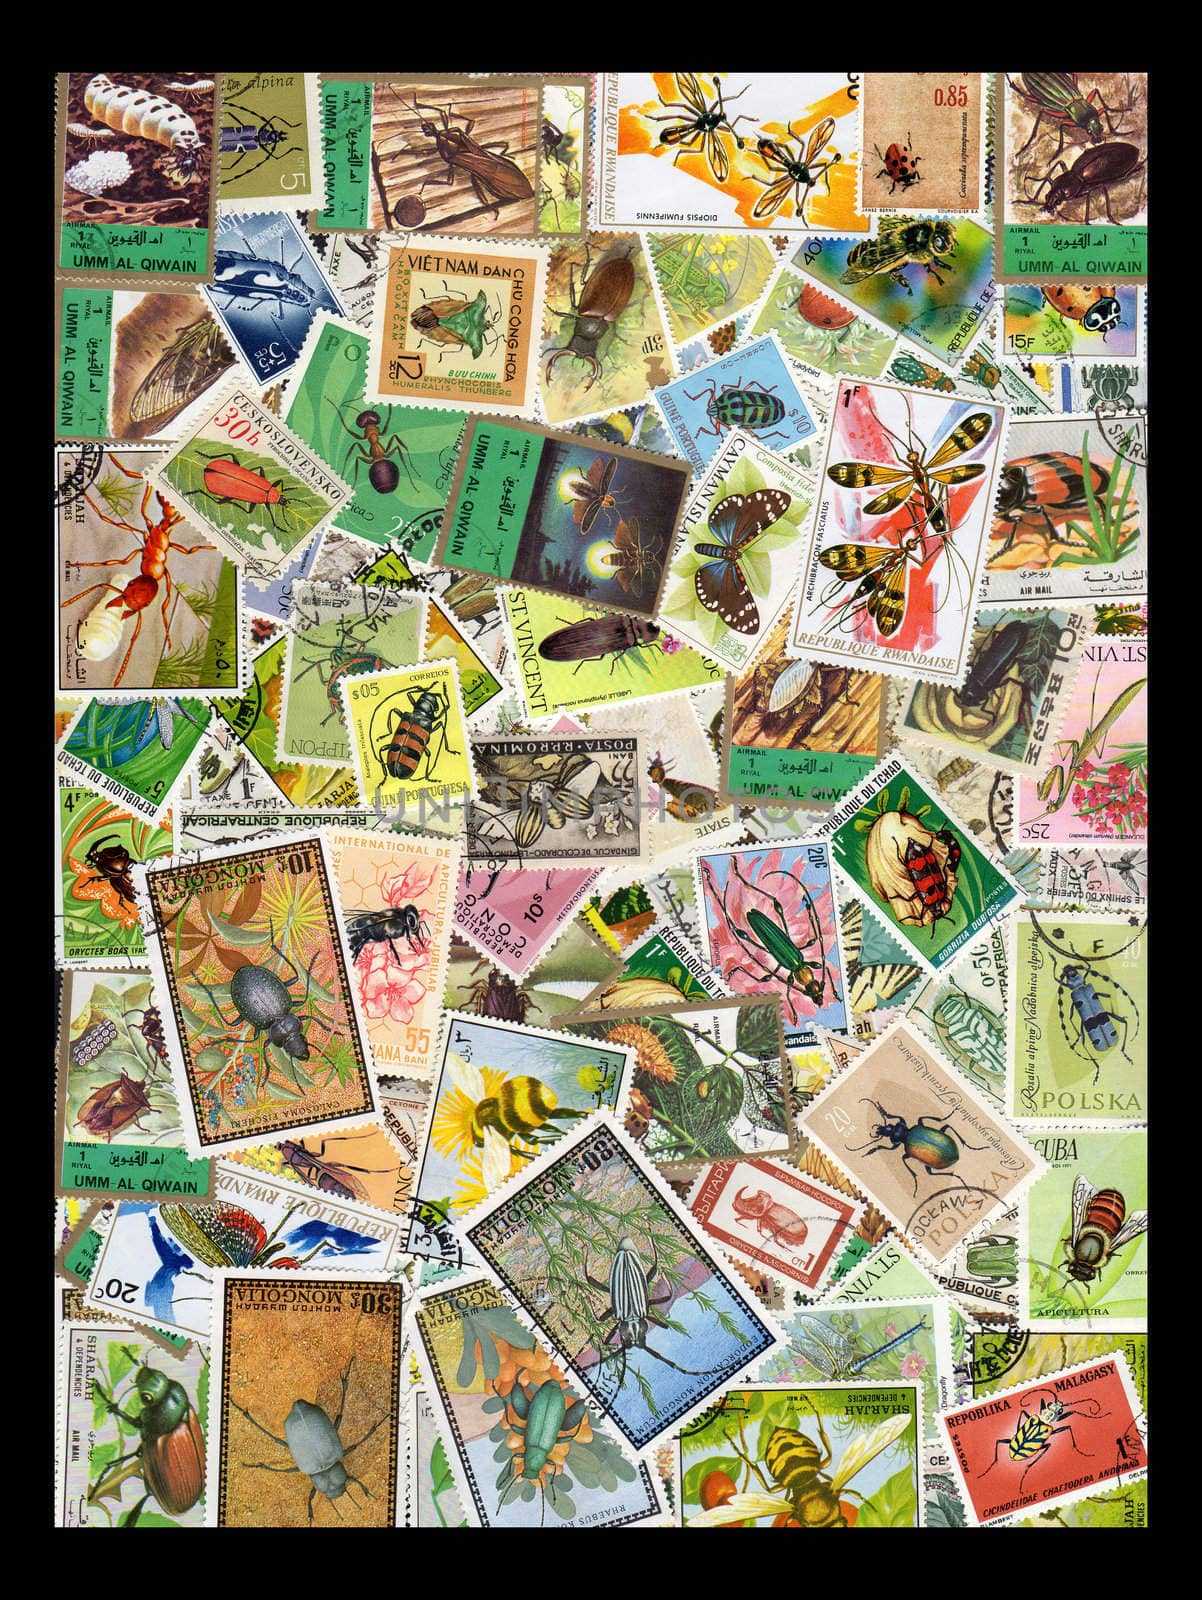 Insect Postage Stamps by d40xboy